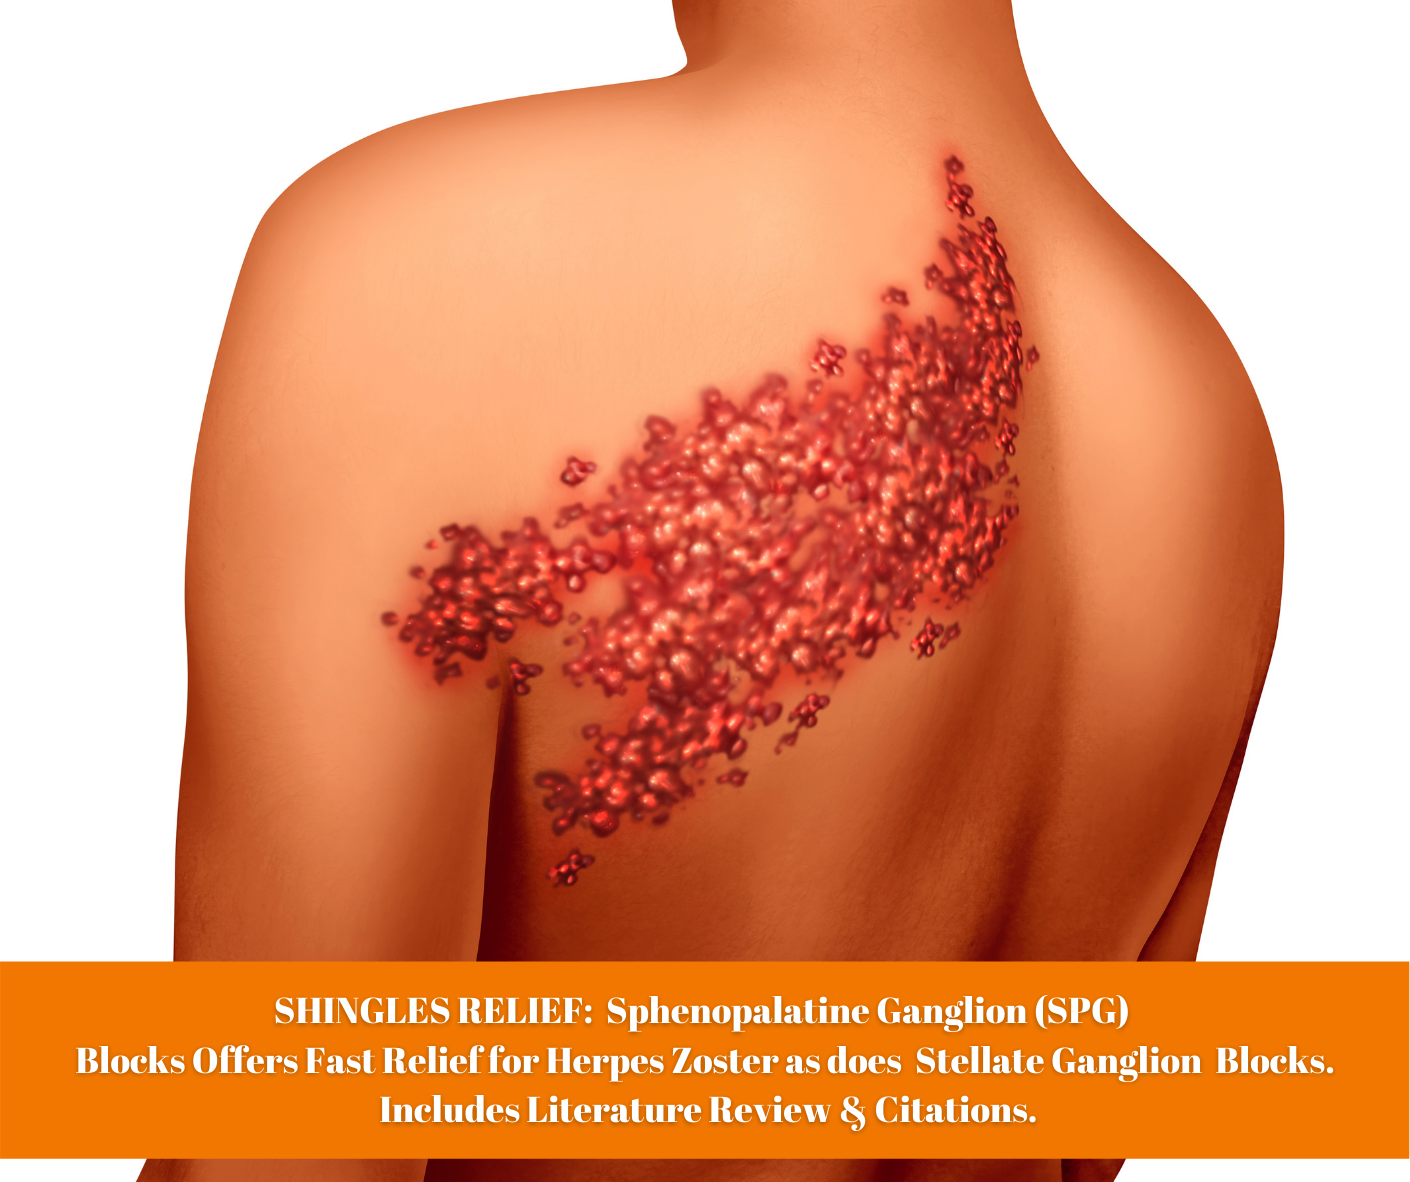 SHINGLES RELIEF:  Sphenopalatine Ganglion (SPG)  Blocks Offers Fast Relief for Herpes Zoster as does  Stellate Ganglion Blocks.  Includes Literature Review & Citations.